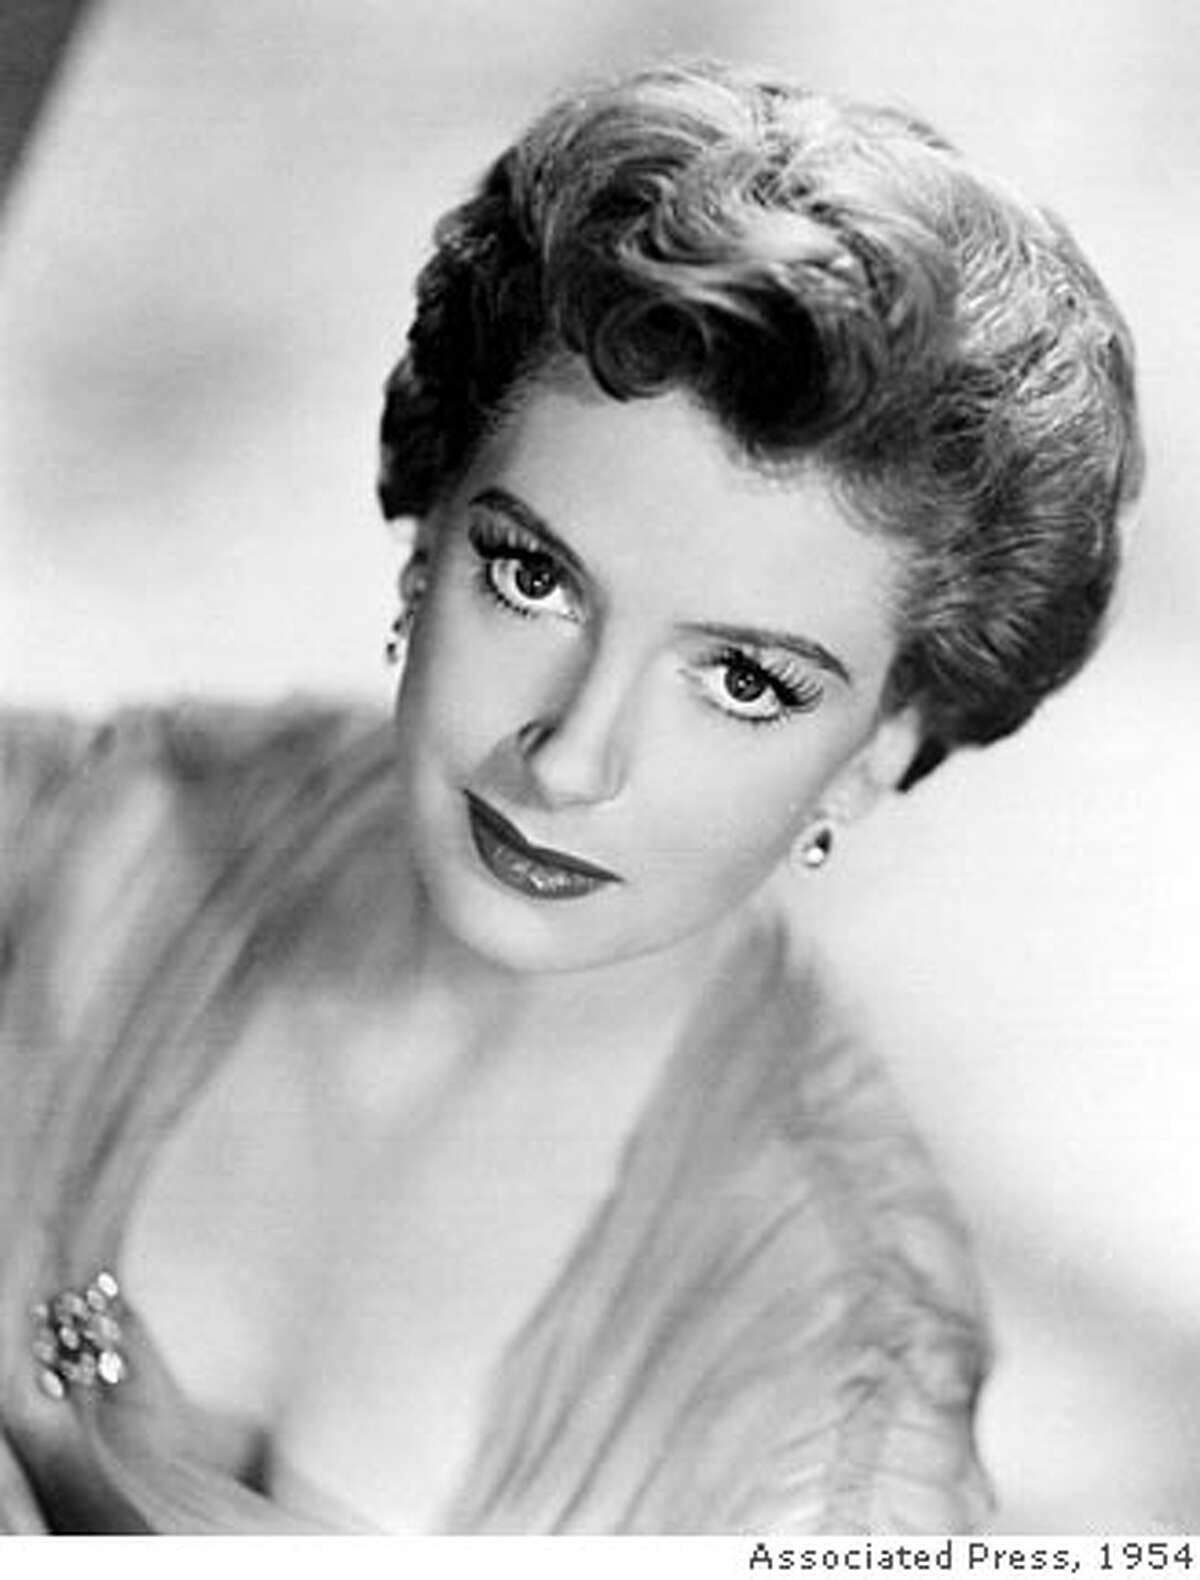 ** FILE ** British actress Deborah Kerr, star of 'From Here To Eternity' and 'The King And I', seen in this 1954 file photo, has died at the age of 86 her agent accounced in London, Thursday Oct. 18 2007. (AP Photo/pa-file) ** UNITED KINGDOM OUT: NO SALES: NO ARCHIVE: **